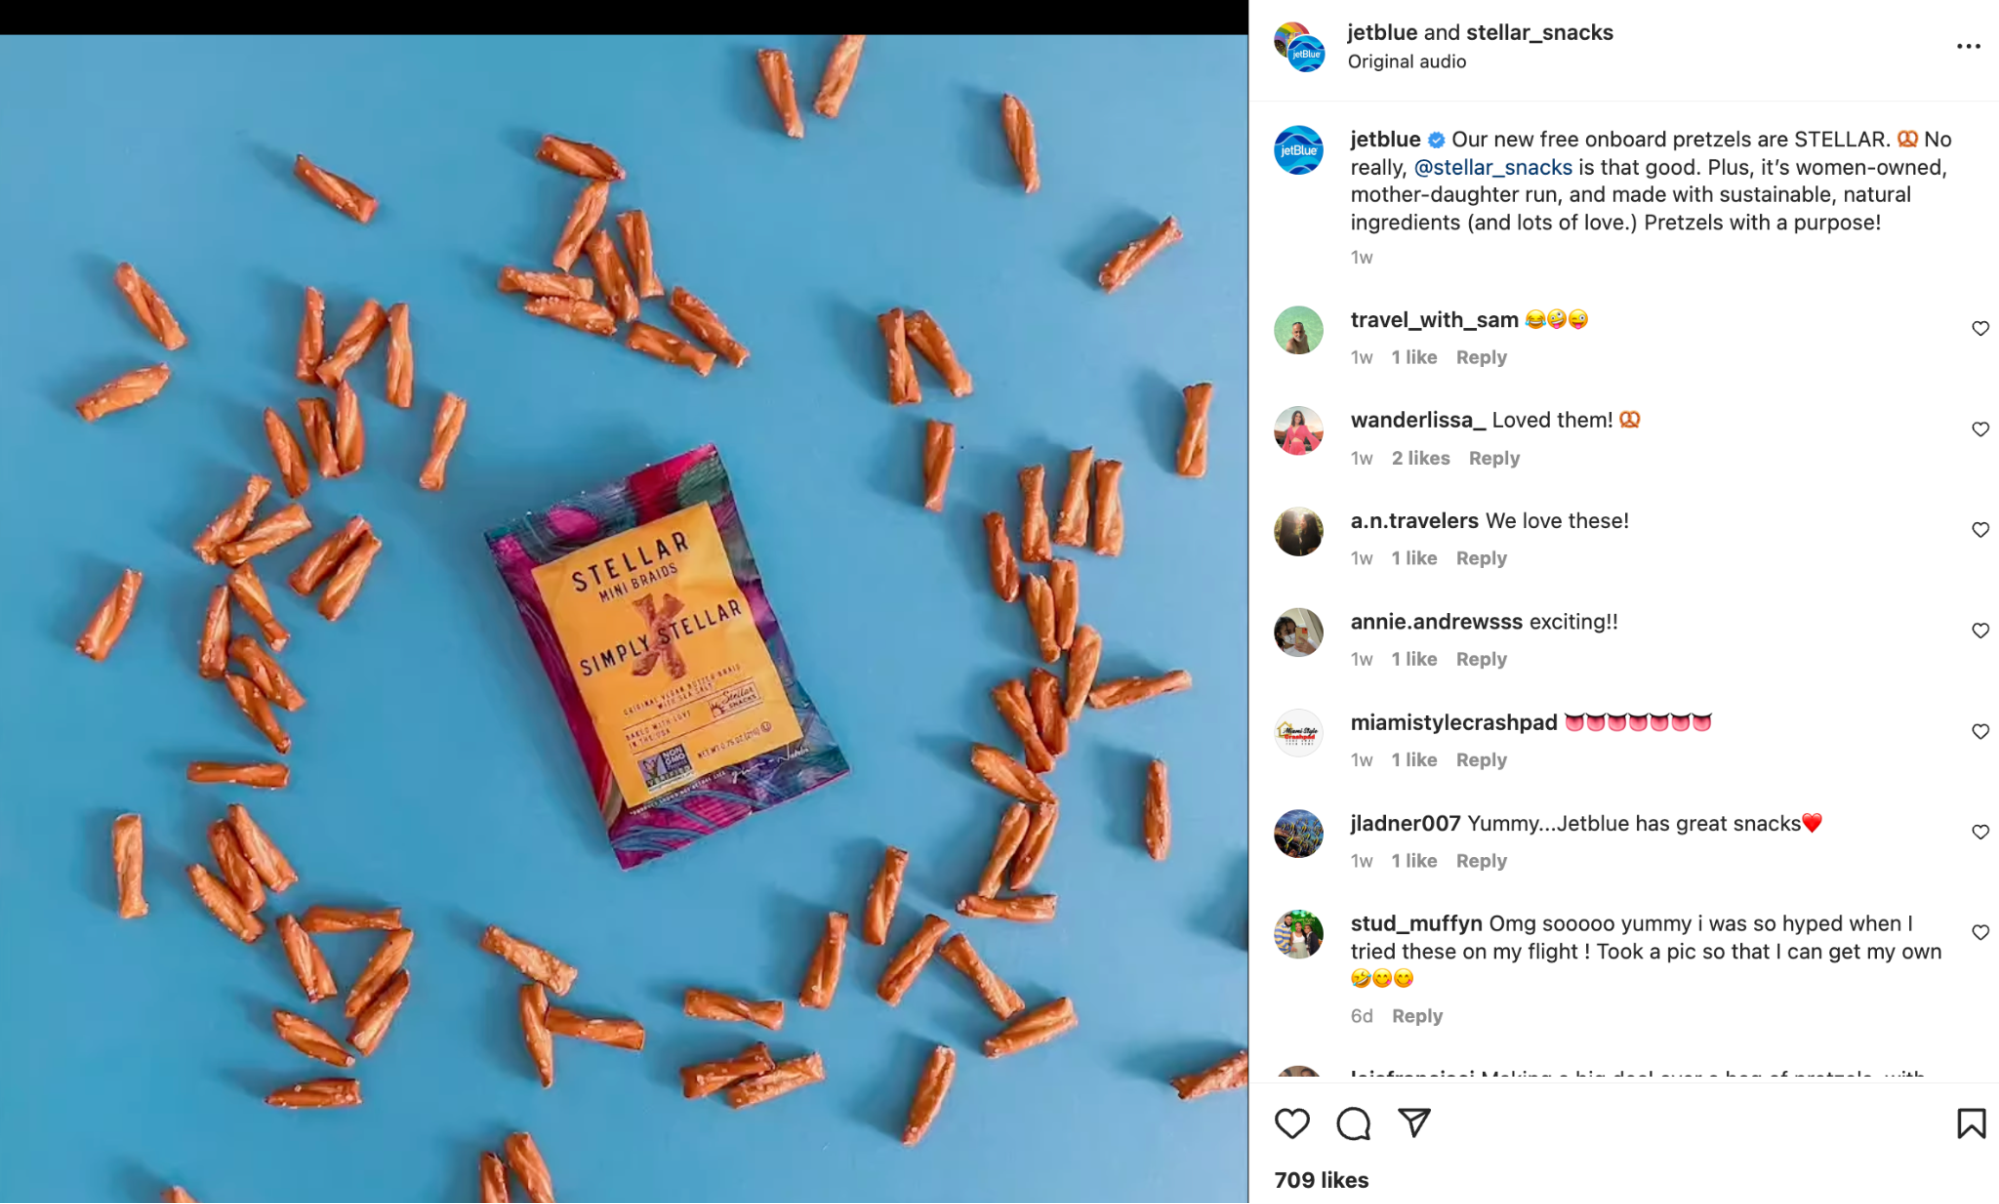 an example of co-marketing with samples between Stellar Snacks and JetBlue